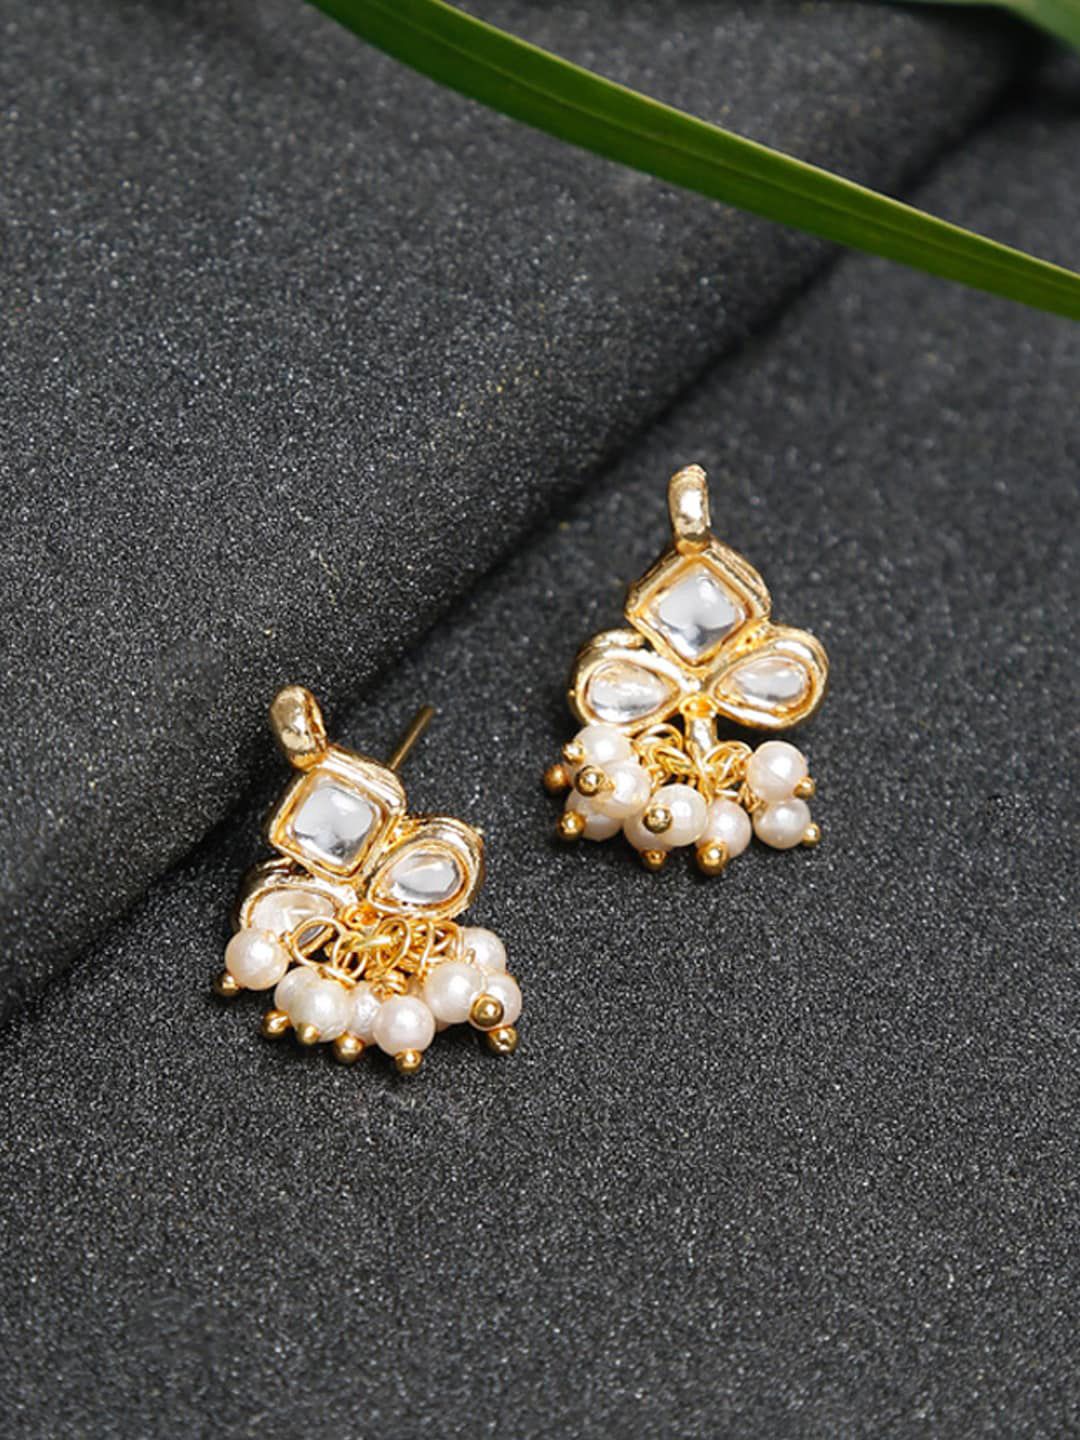 Ruby Raang Women Gold-Toned & Kundan Studded Classic Studs Earrings Price in India